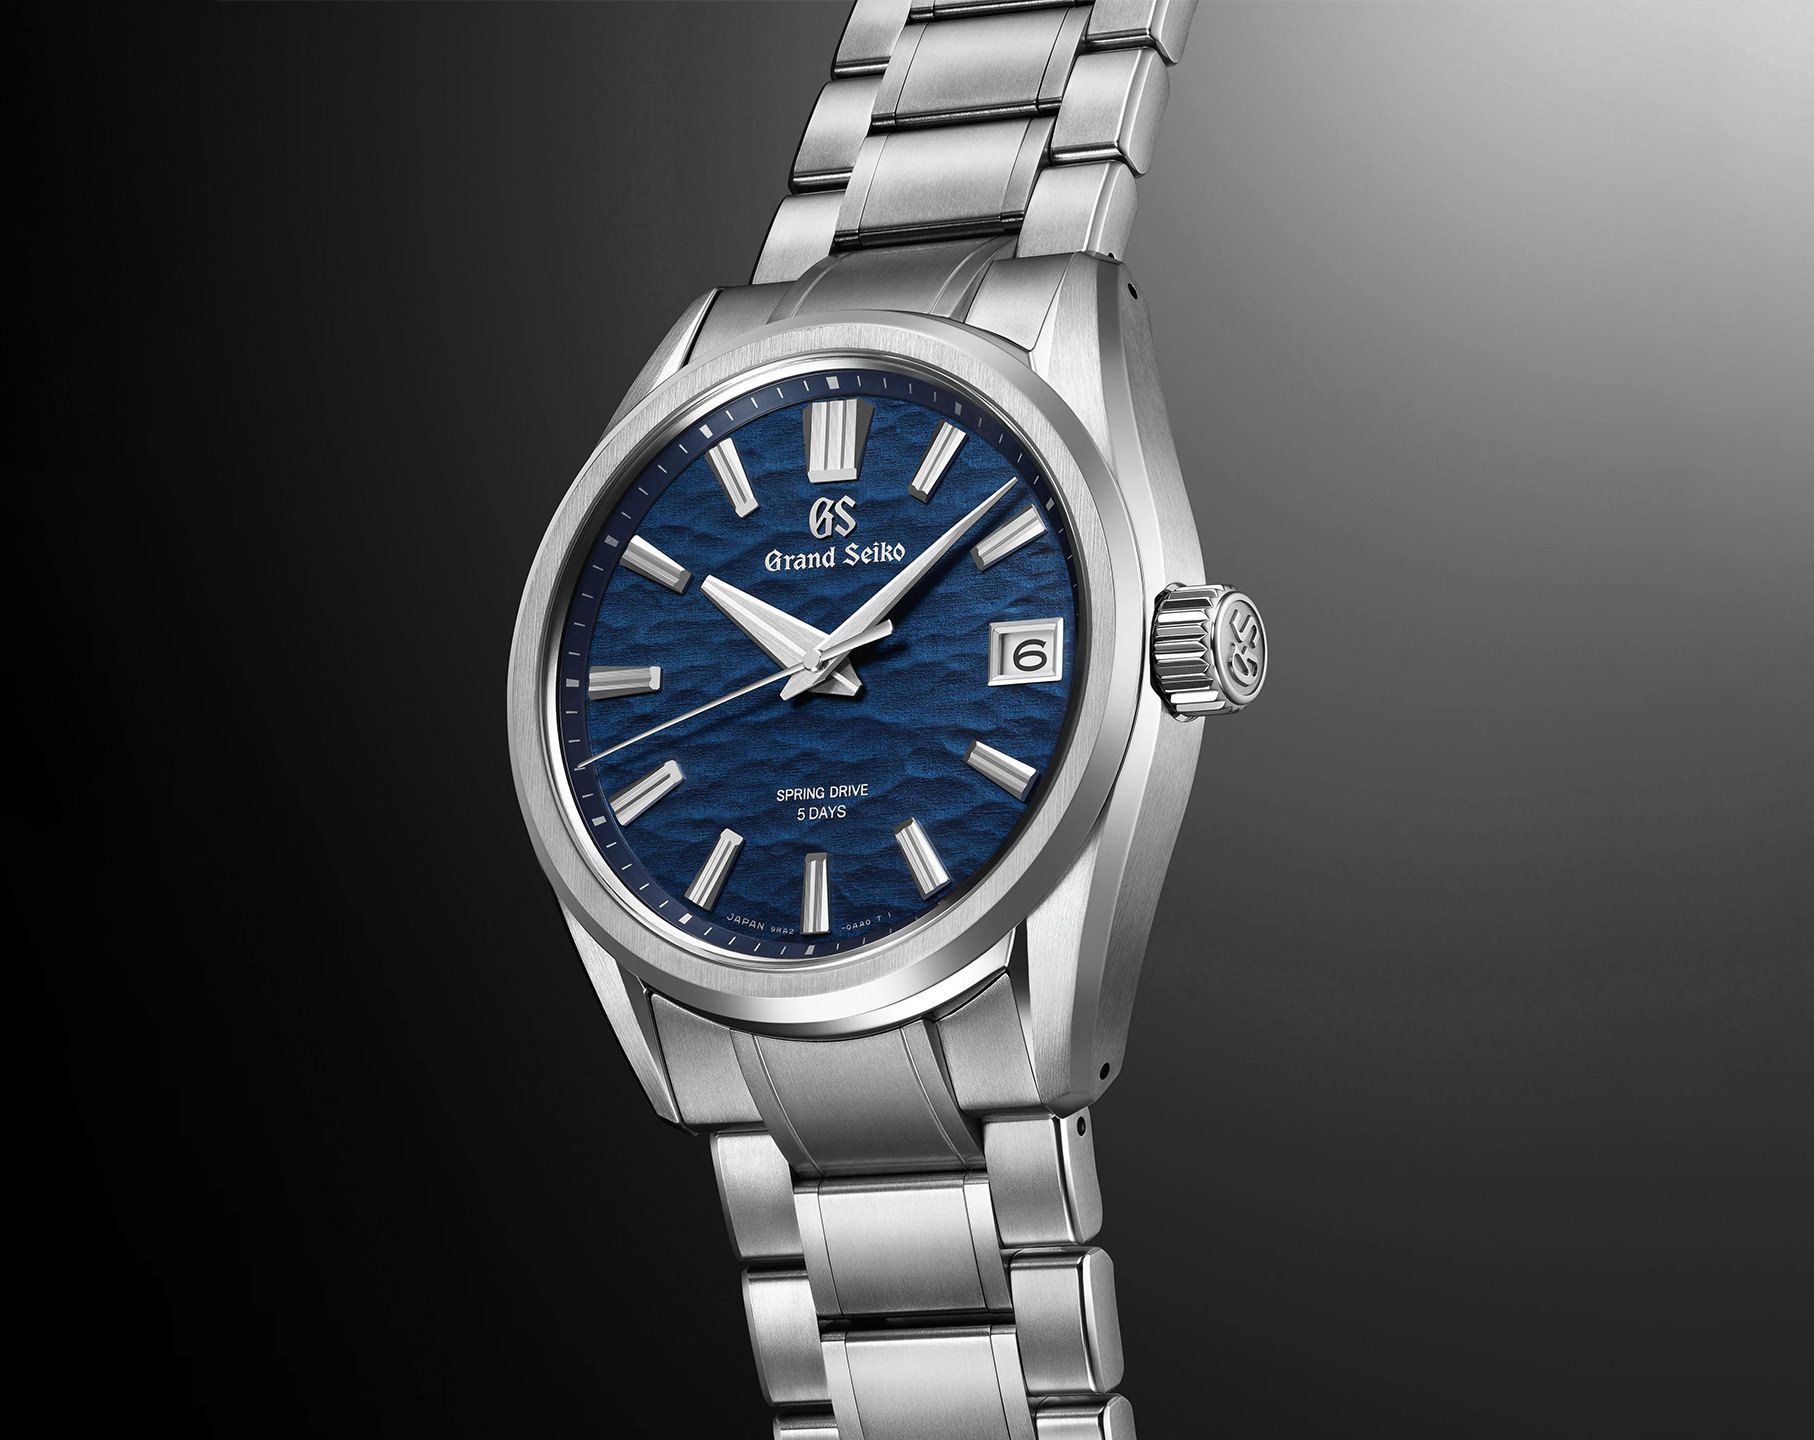 Grand Seiko Evolution 9 40 mm Watch in Blue Dial